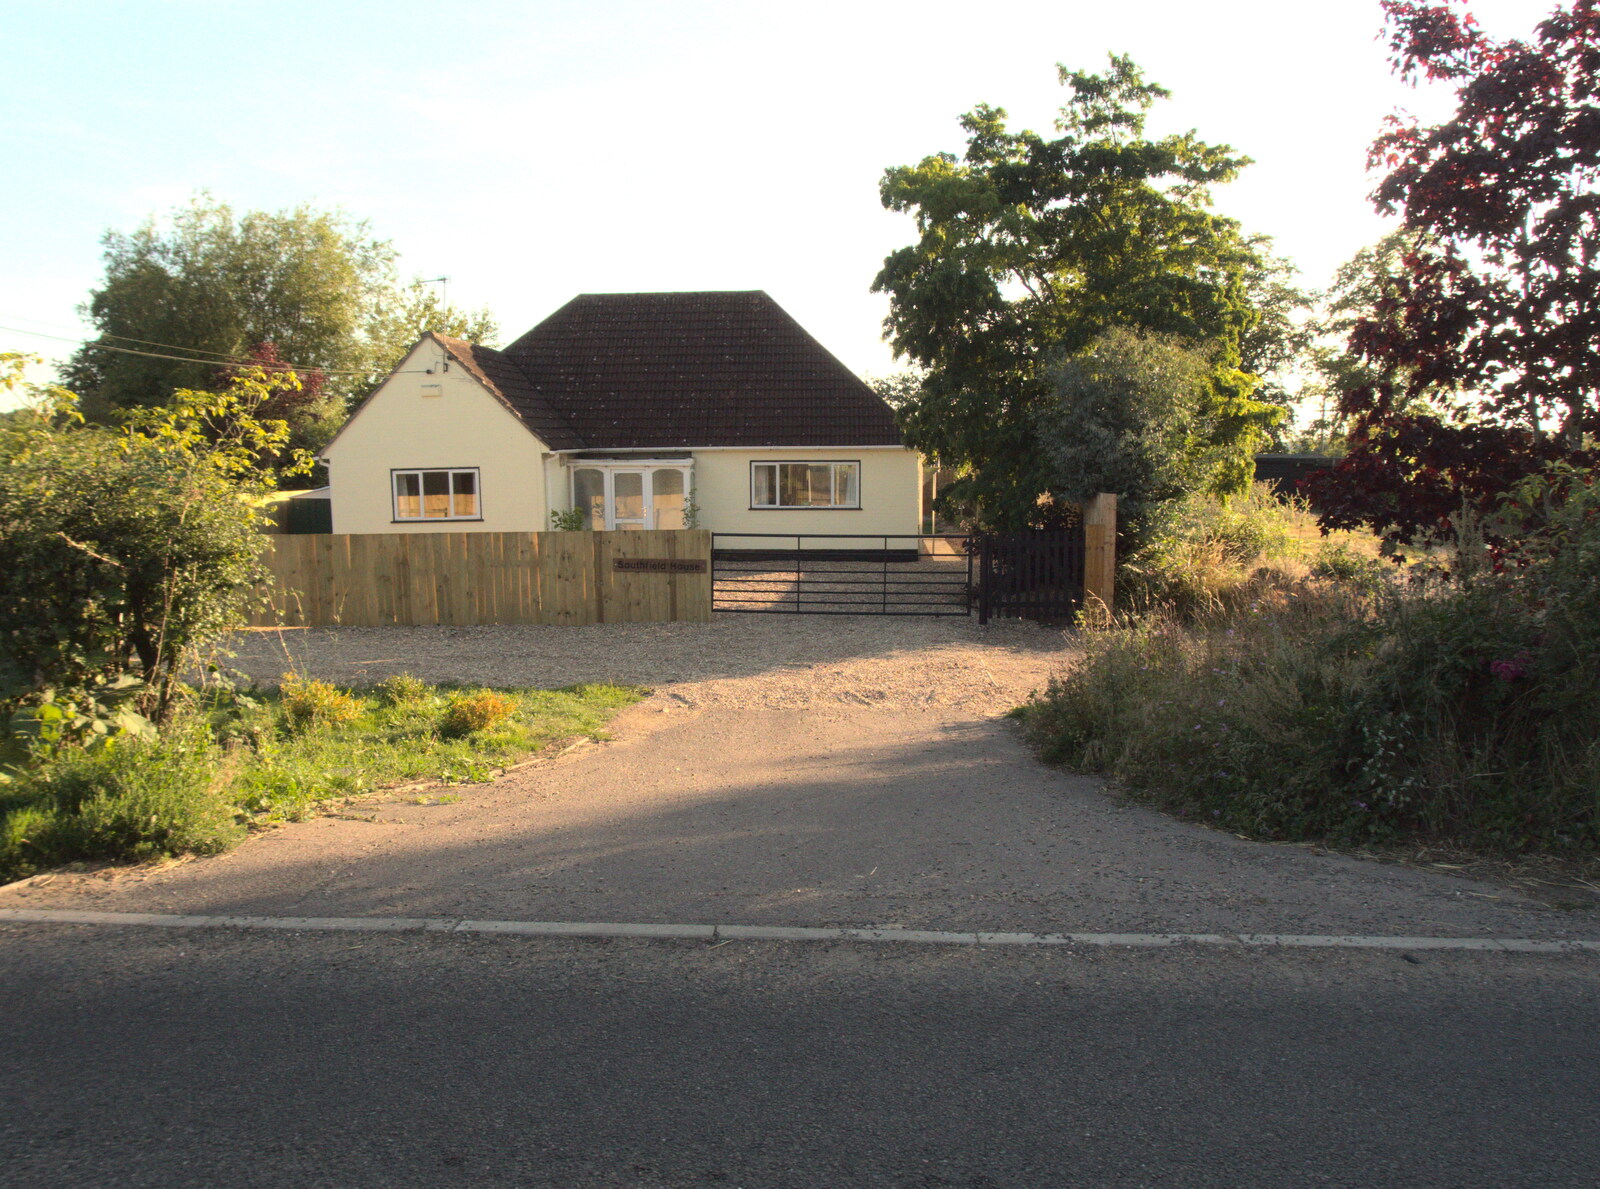 The G-Unit's old place on Cranley Green Road from The BSCC at The Earl Soham Victoria and Station 119, Eye, Suffolk - 6th August 2020